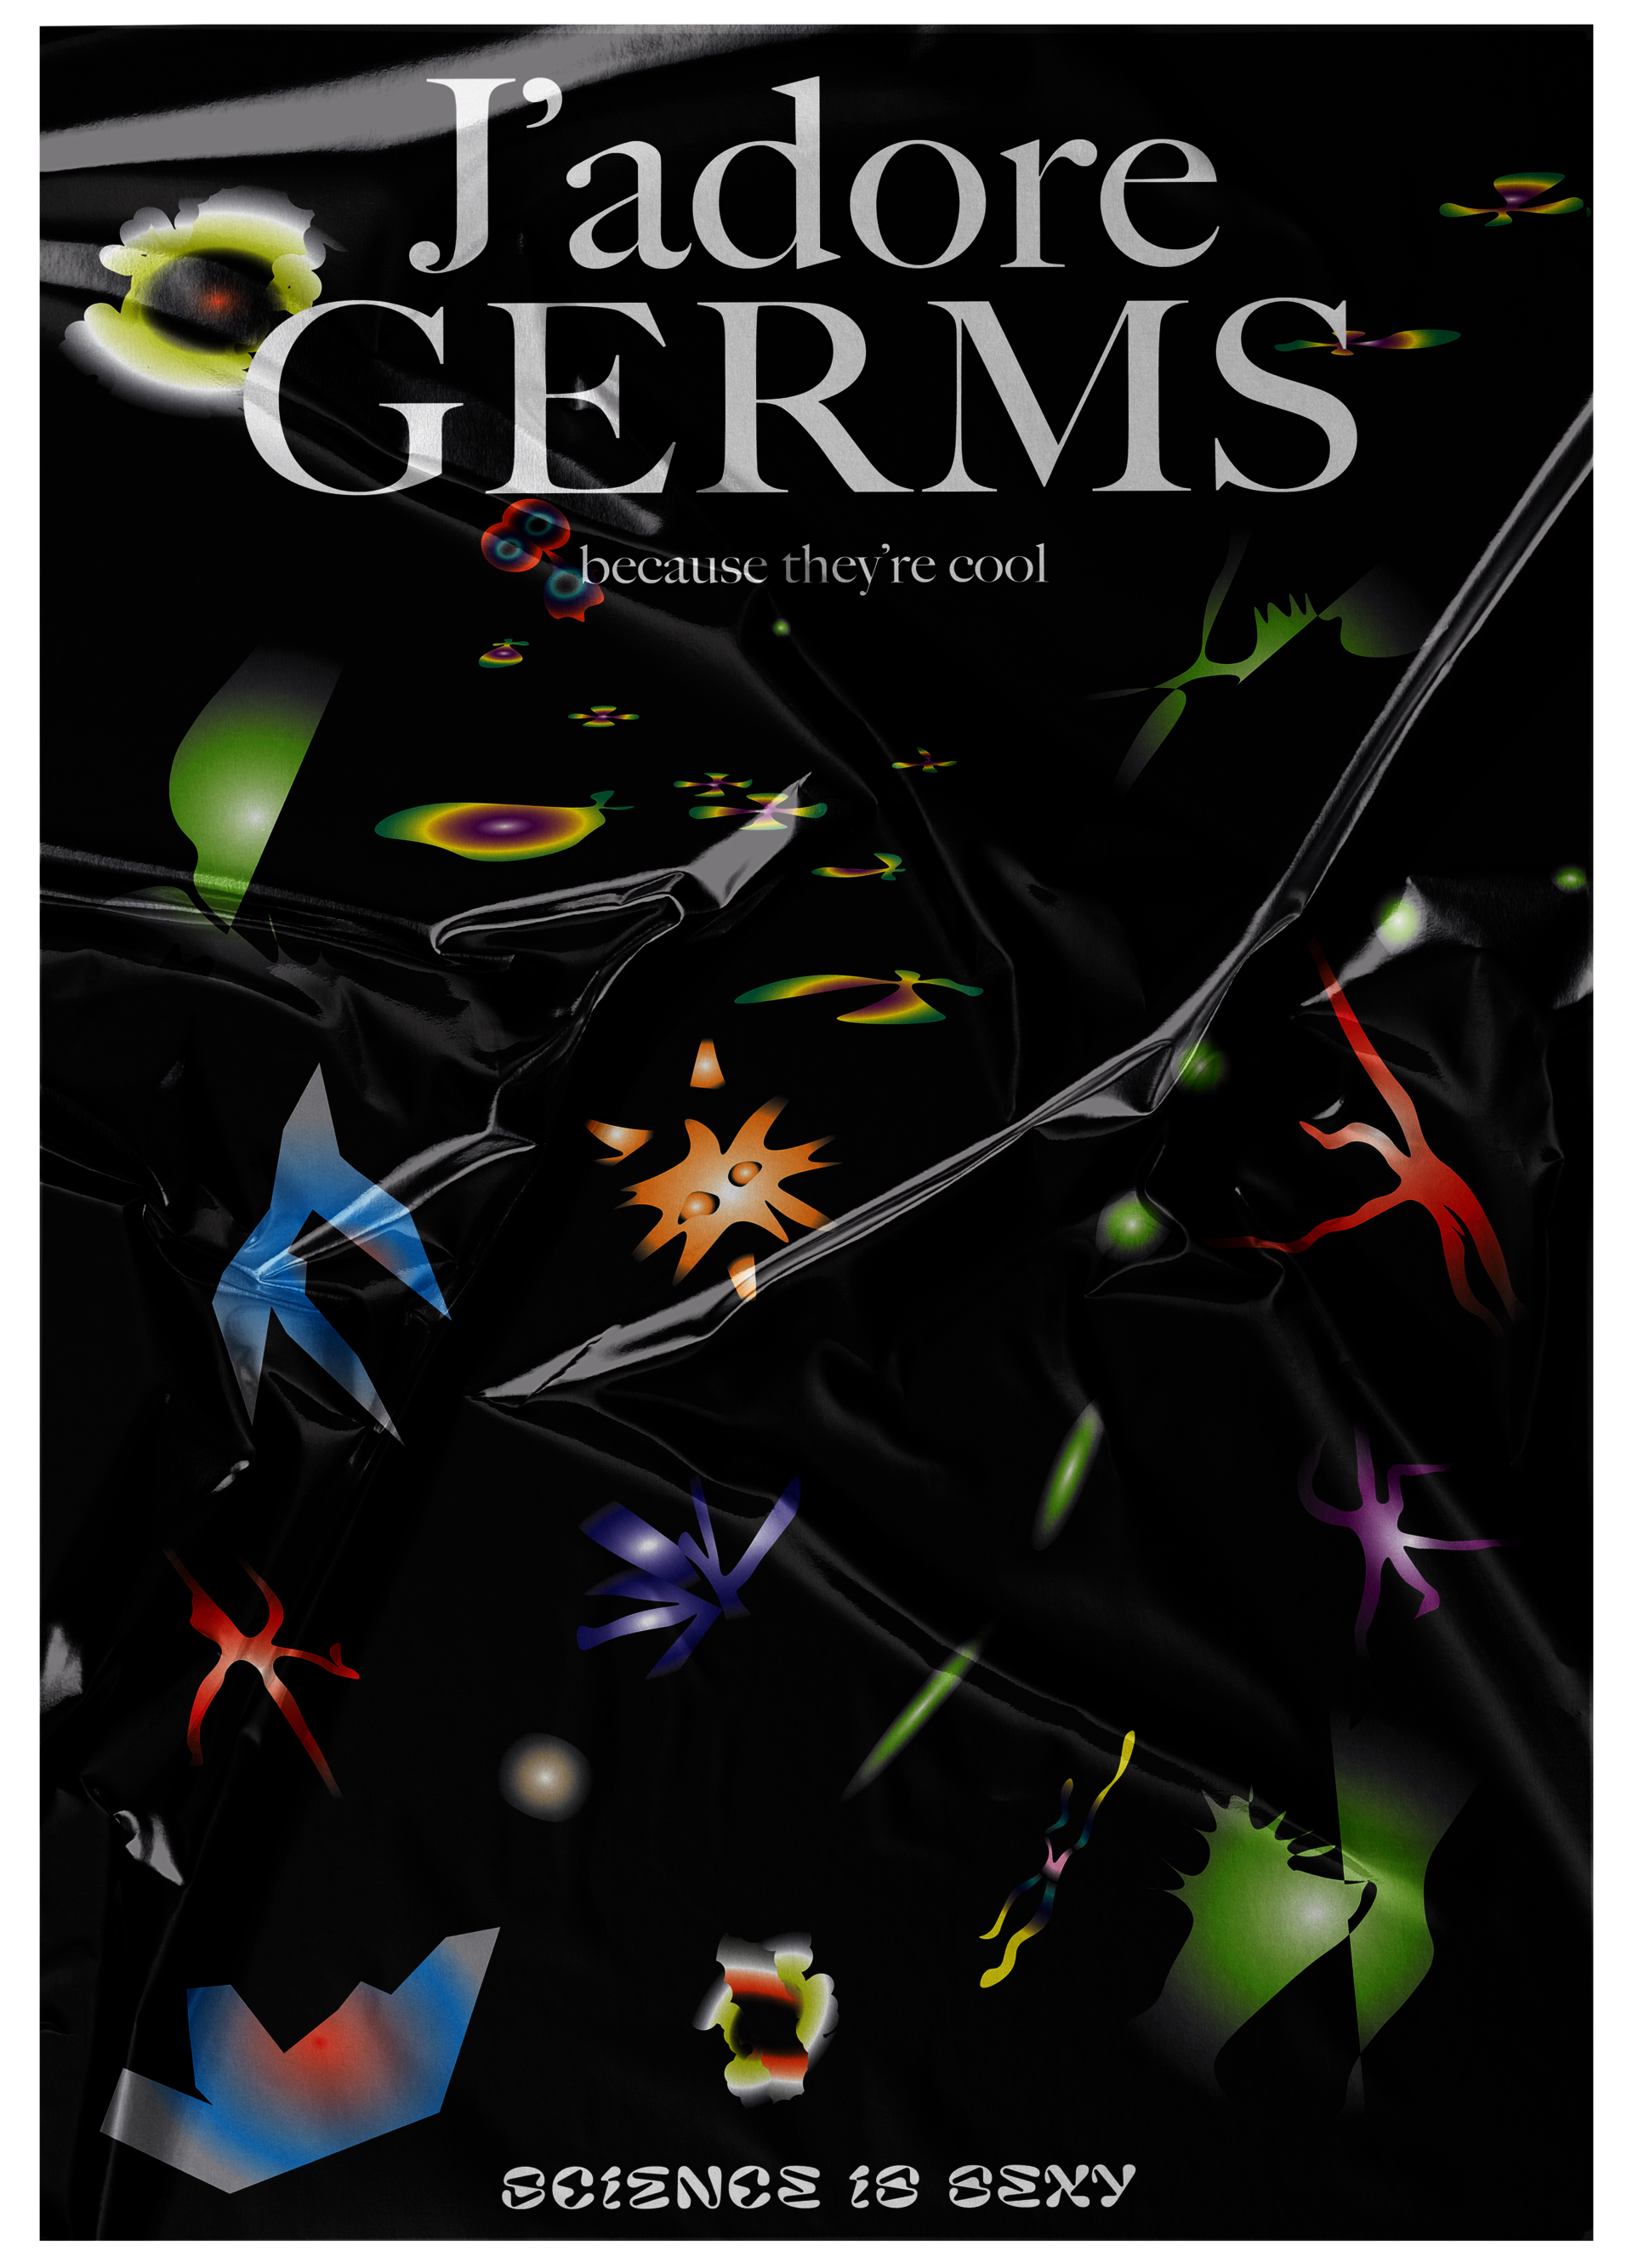 Poster design with the text 'J'adore GERMS because they're cool' and 'Science is Sexy'